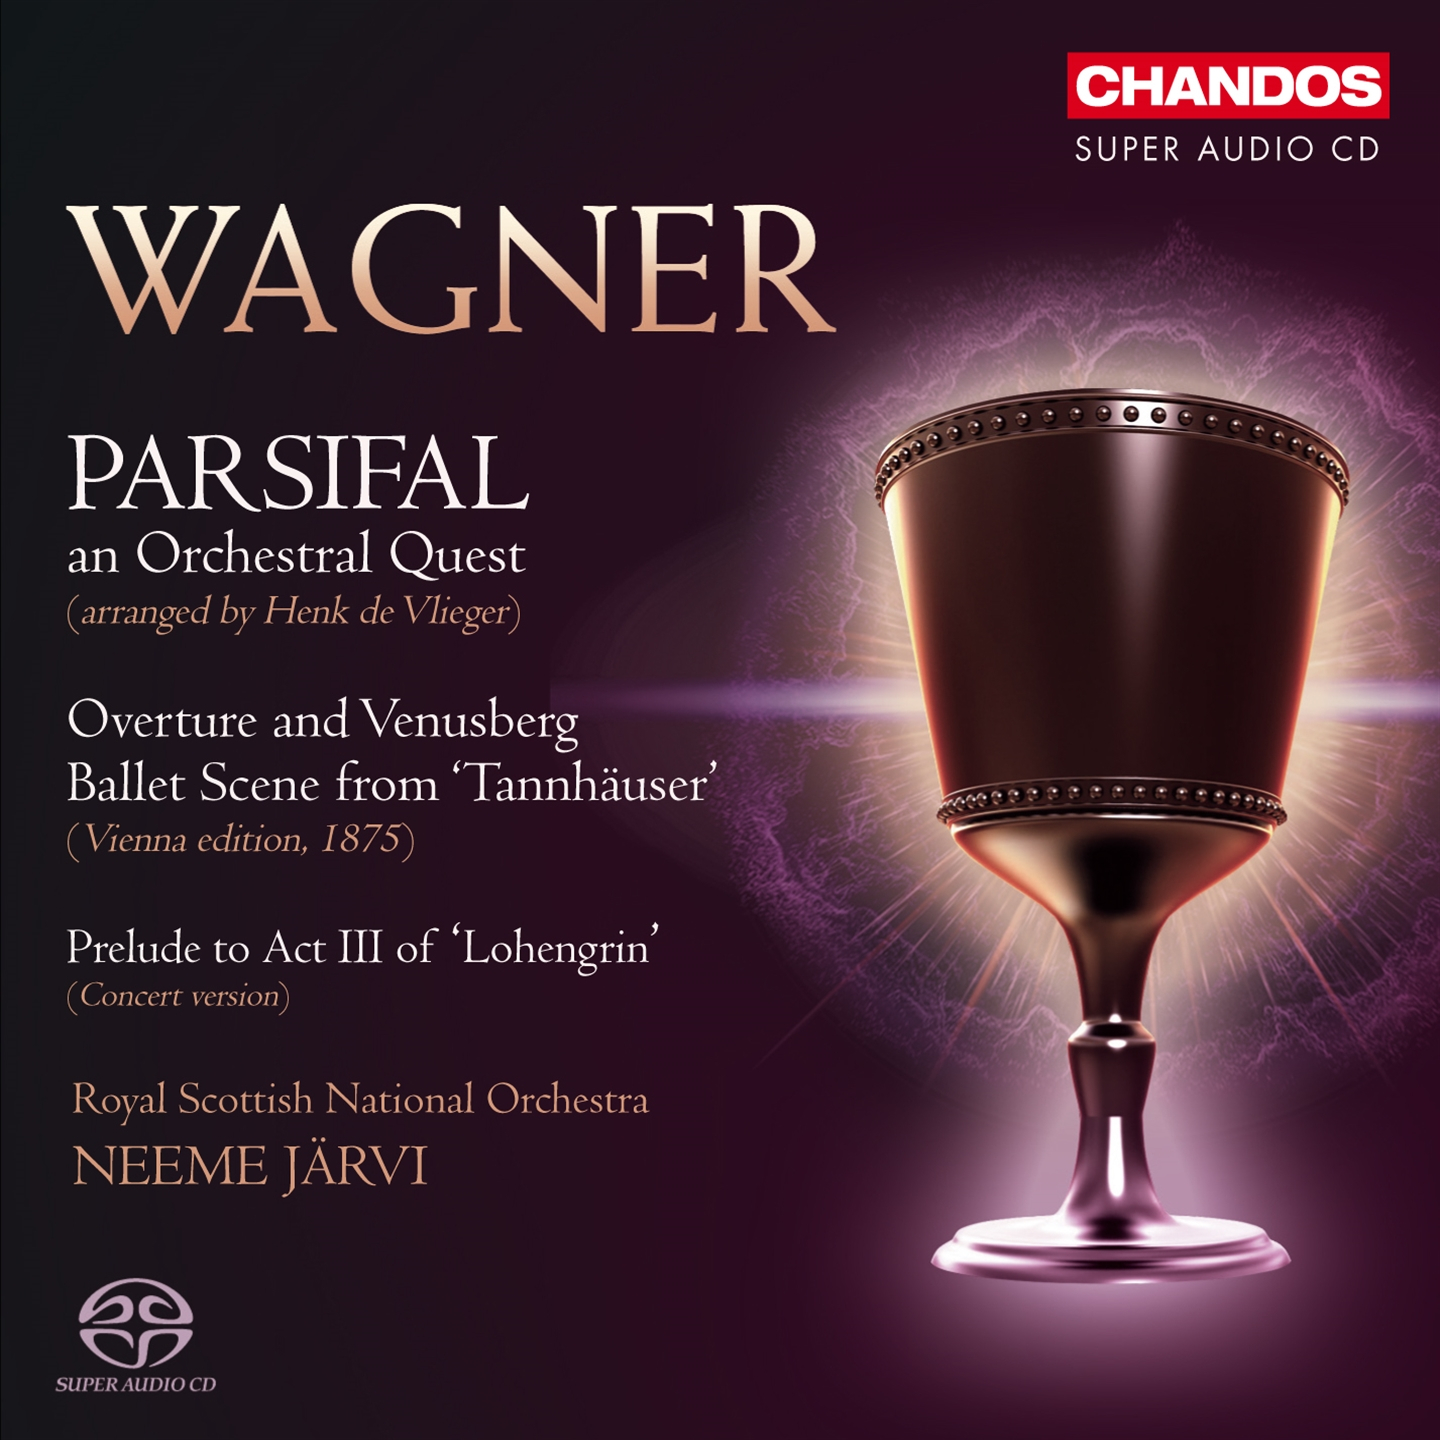 WAGNER: PARSIFAL